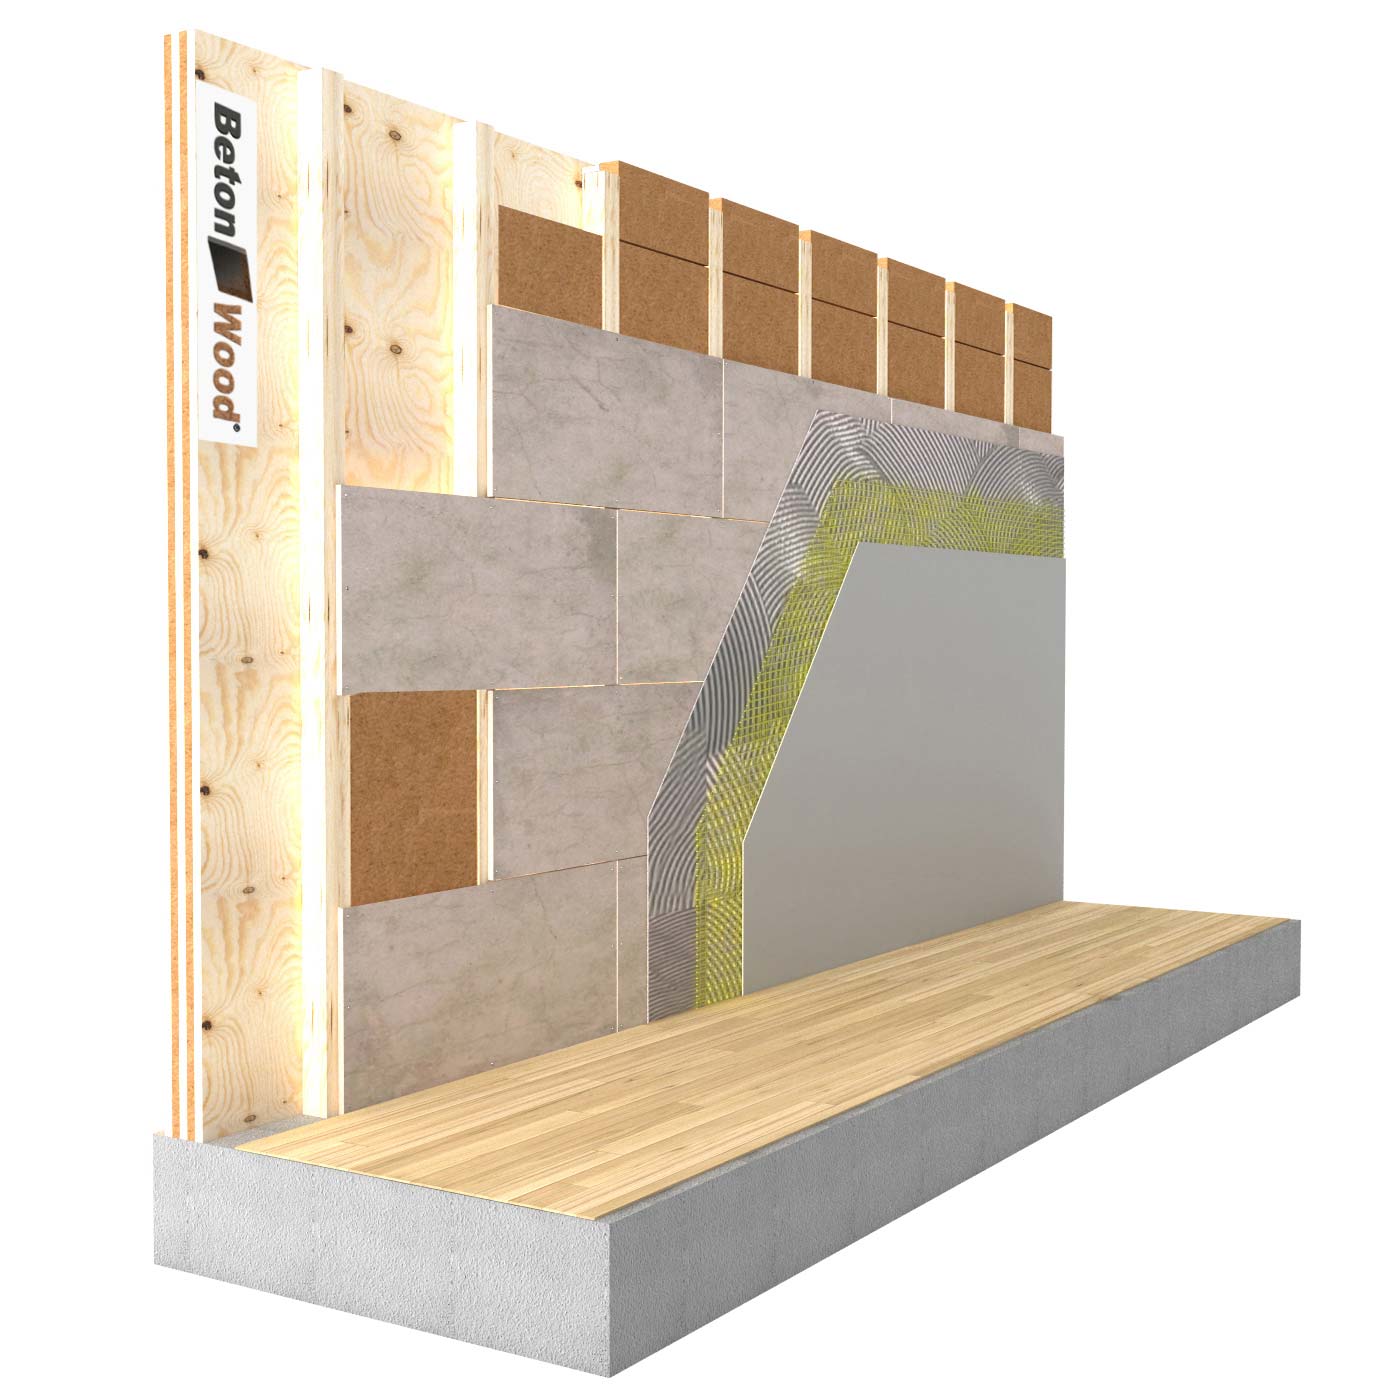 Internal insulation system in Protect dry Wood fiber and cement bonded particle board